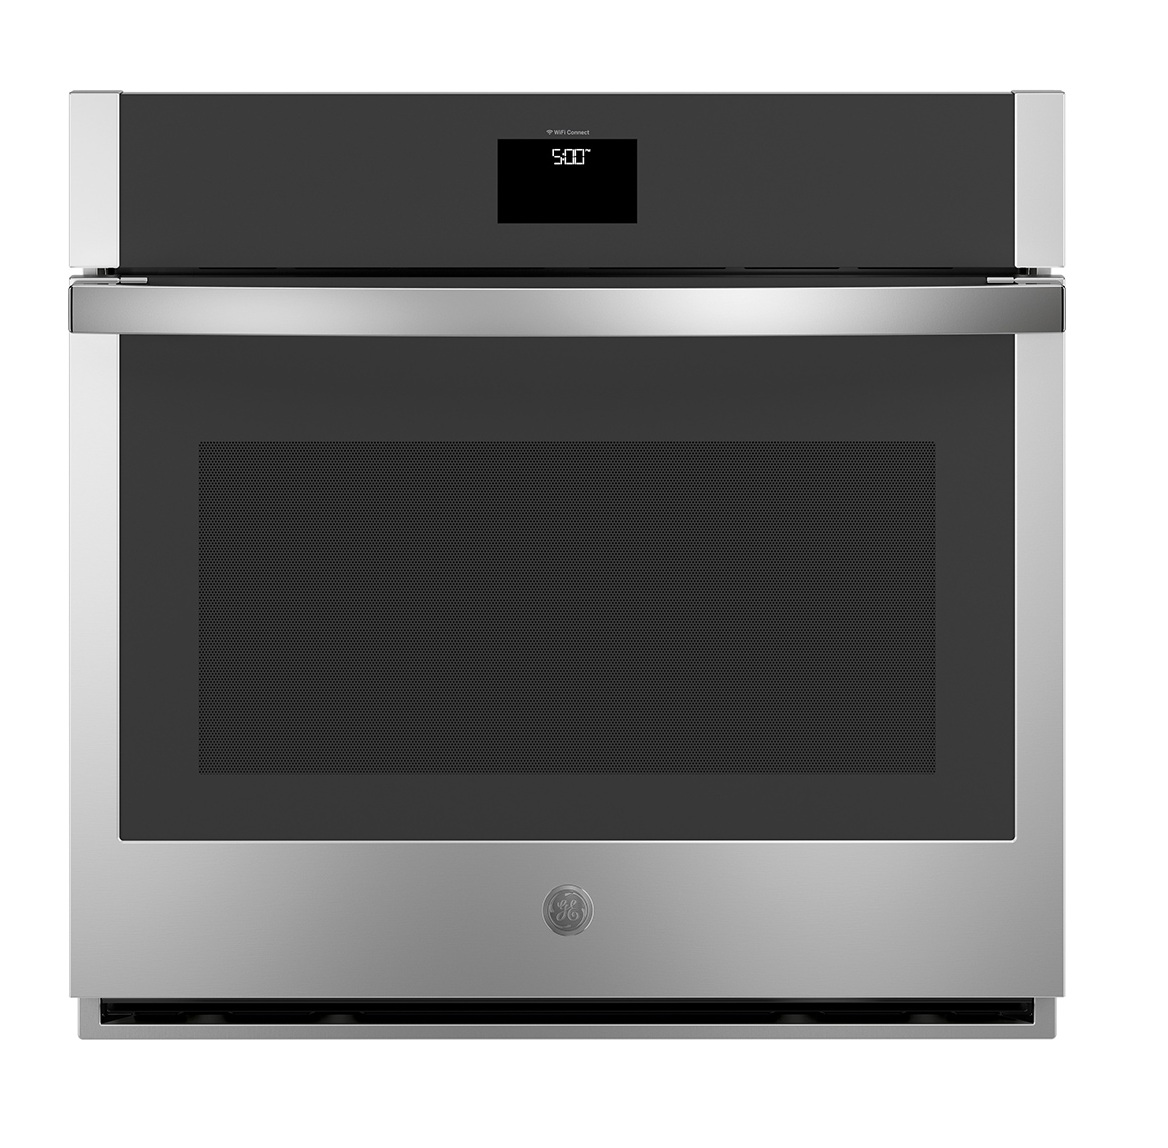 GE JTS5000 30″ Built-In Single Electric Convection Wall Oven Dimensions and Installation Information